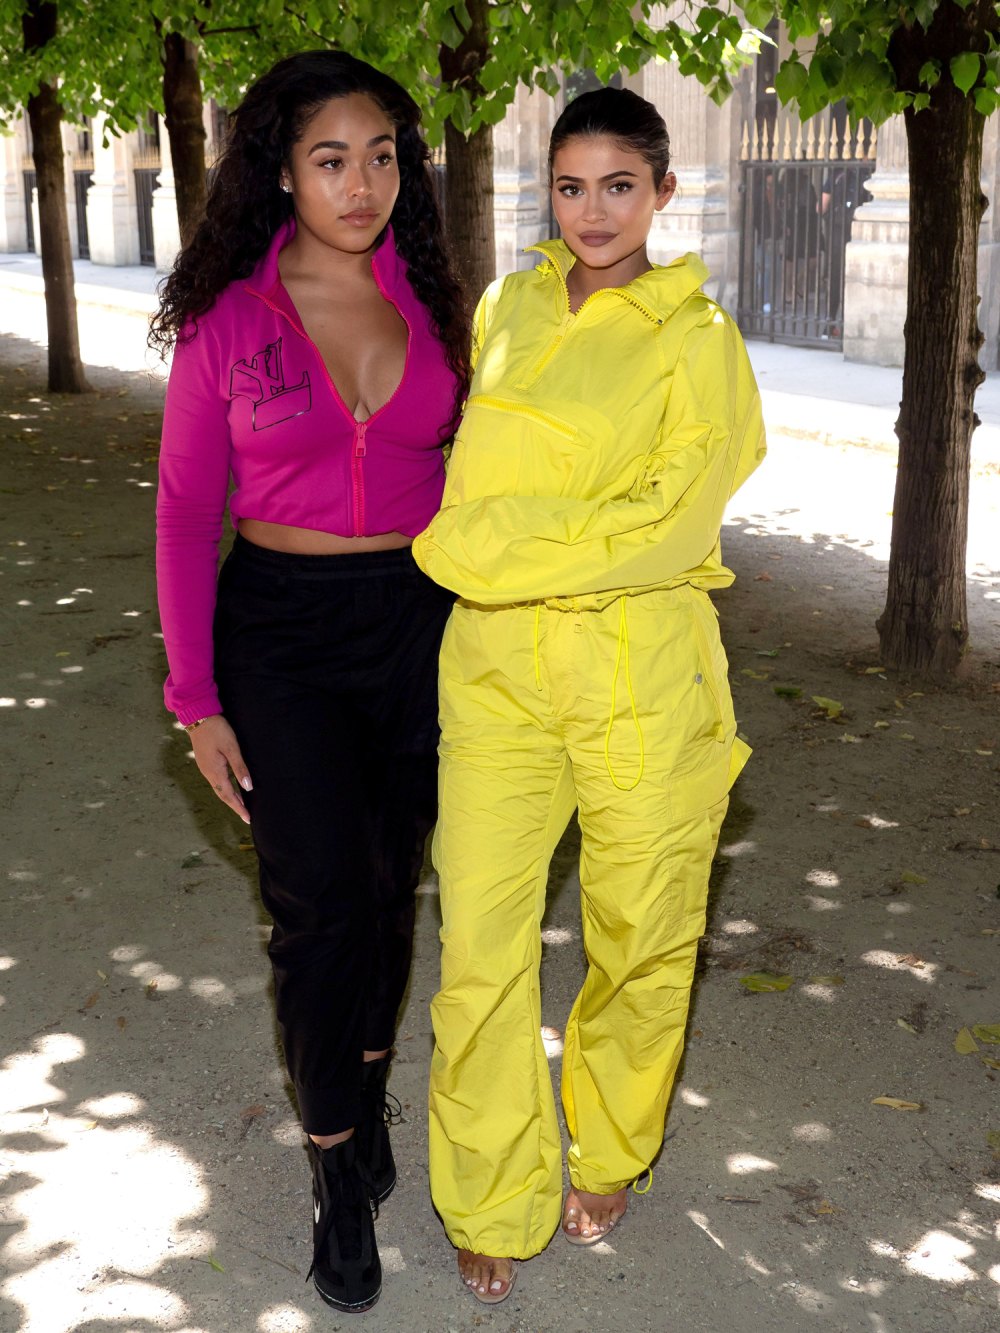 Jordyn Woods Seemingly Shows Support for Selena Gomez Amid Kylie and Hailey Bieber